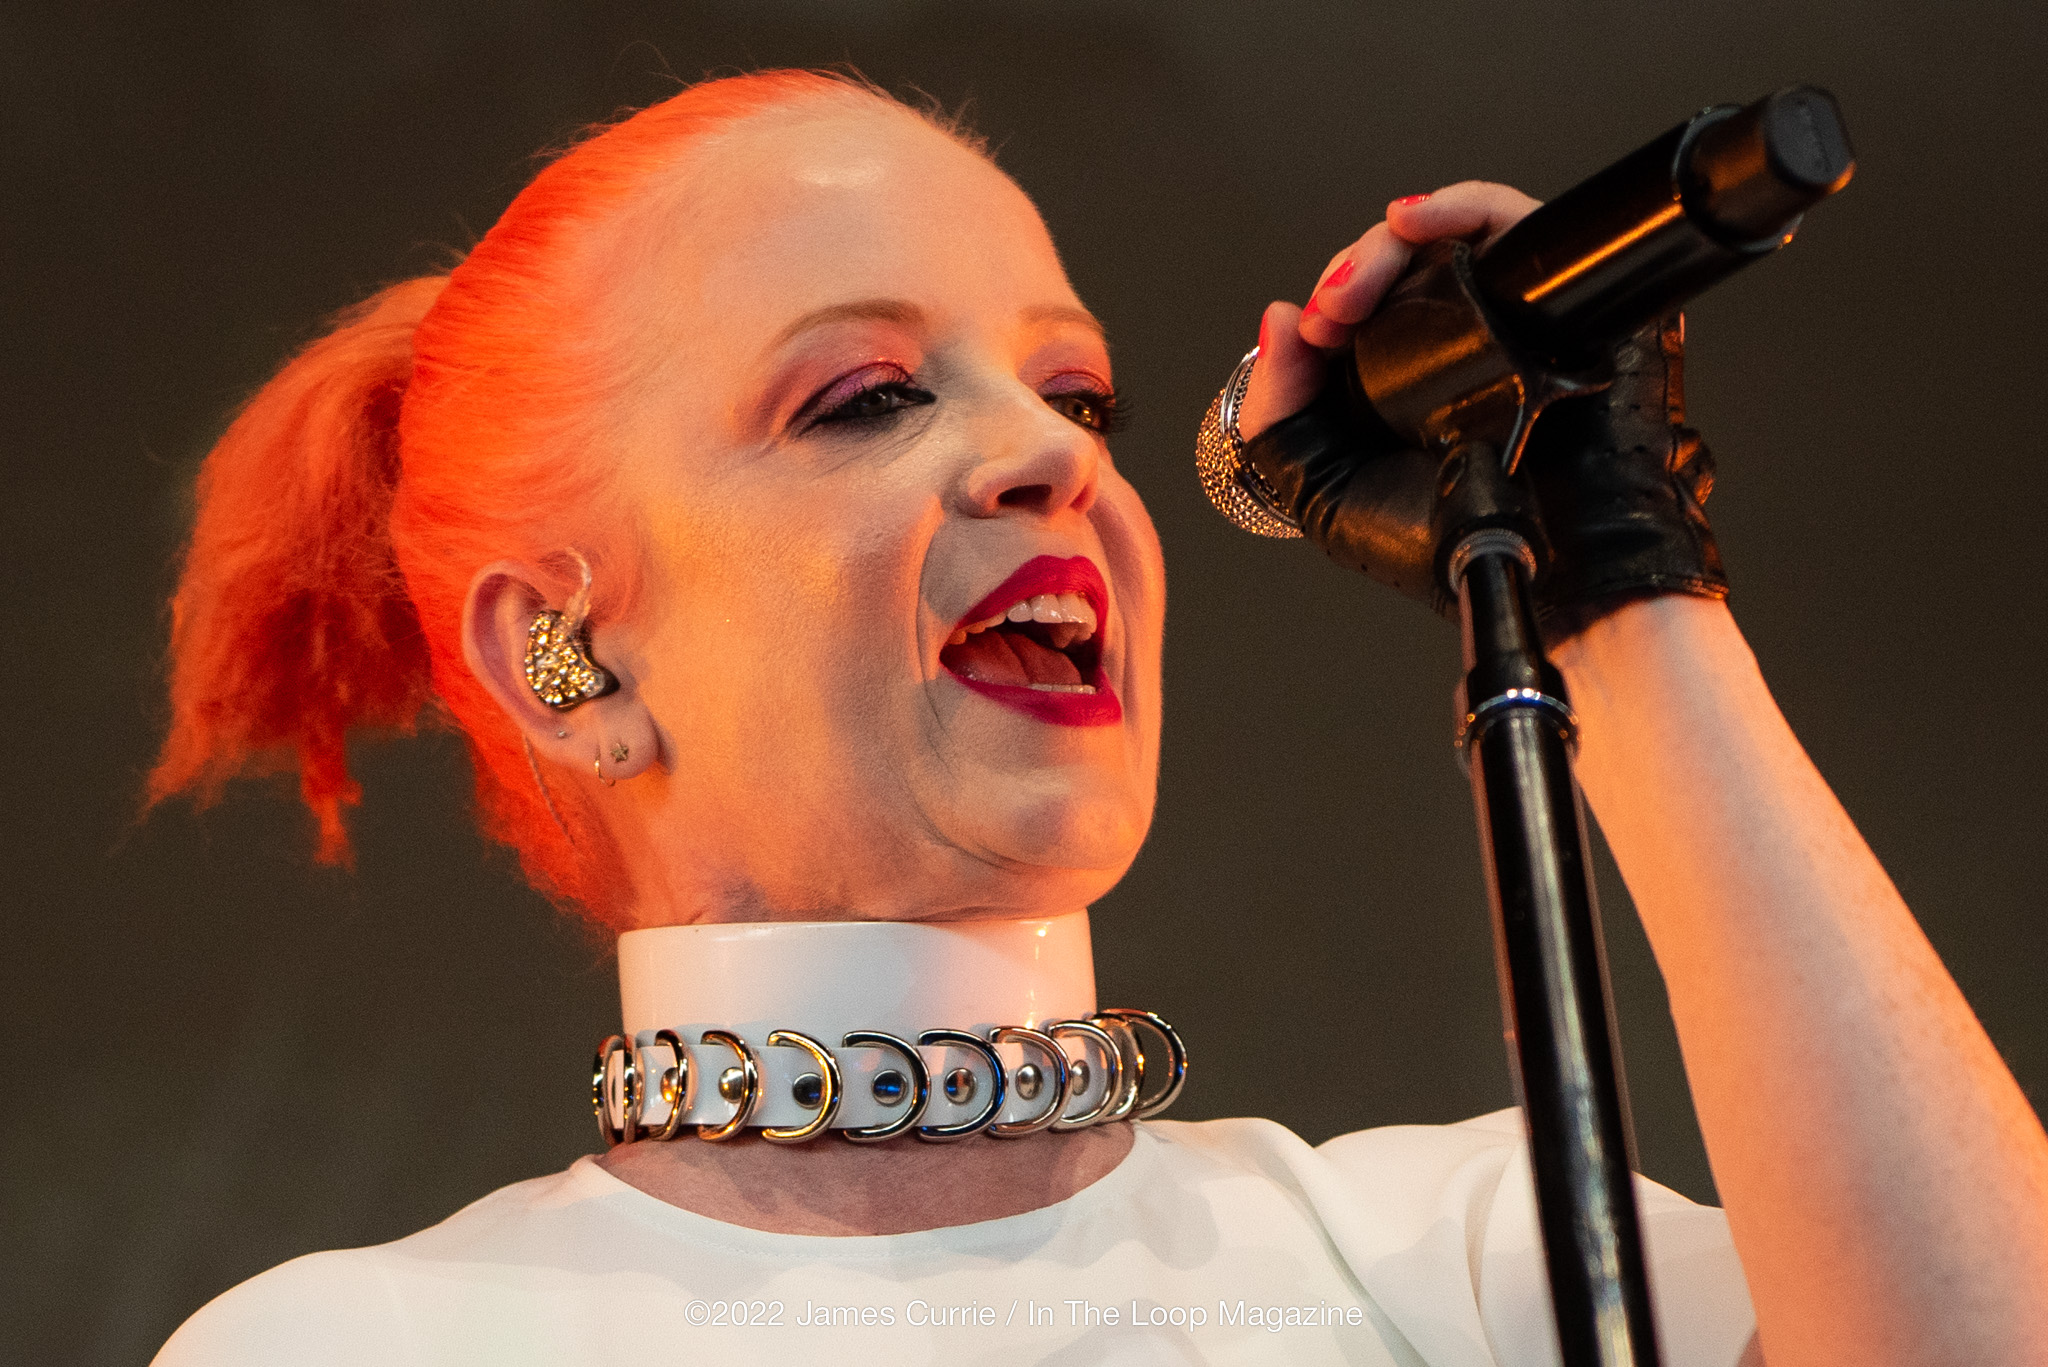 Photo Gallery: Garbage @ Hollywood Casino Amphitheatre (Tinley Park, IL / Chicago, IL)